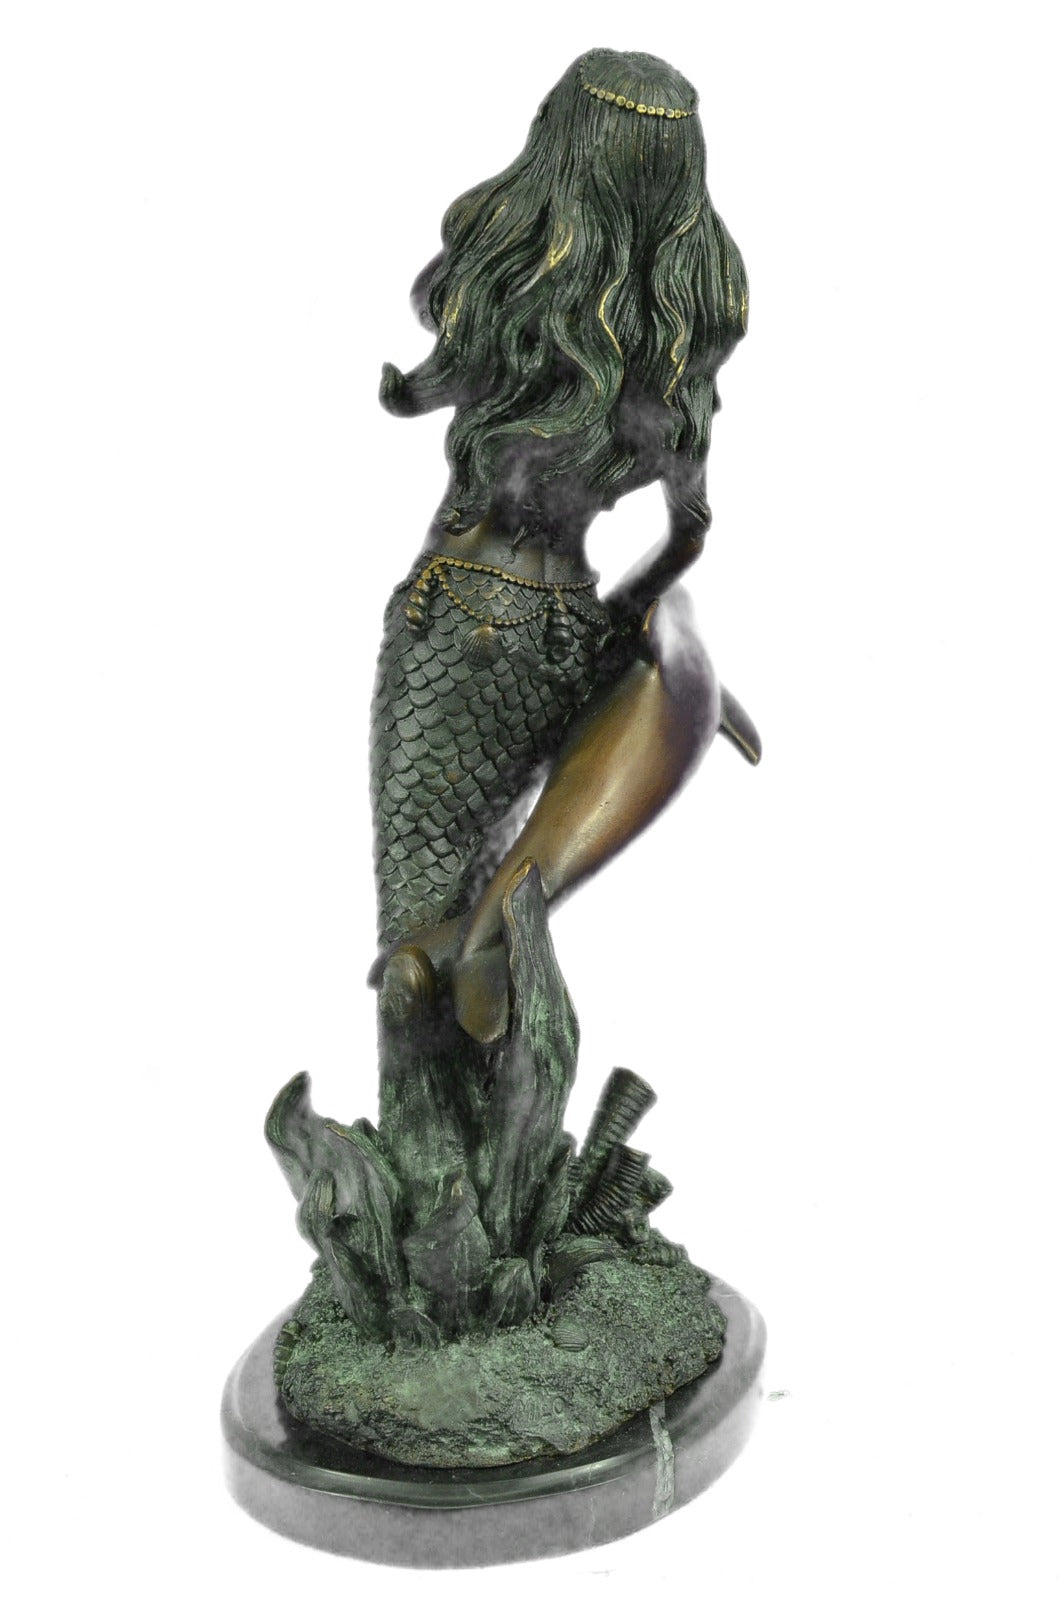 Art Deco Mythical Sculpture Ocean Water Sea Dolphin and Mermaid Bronze Figure NR